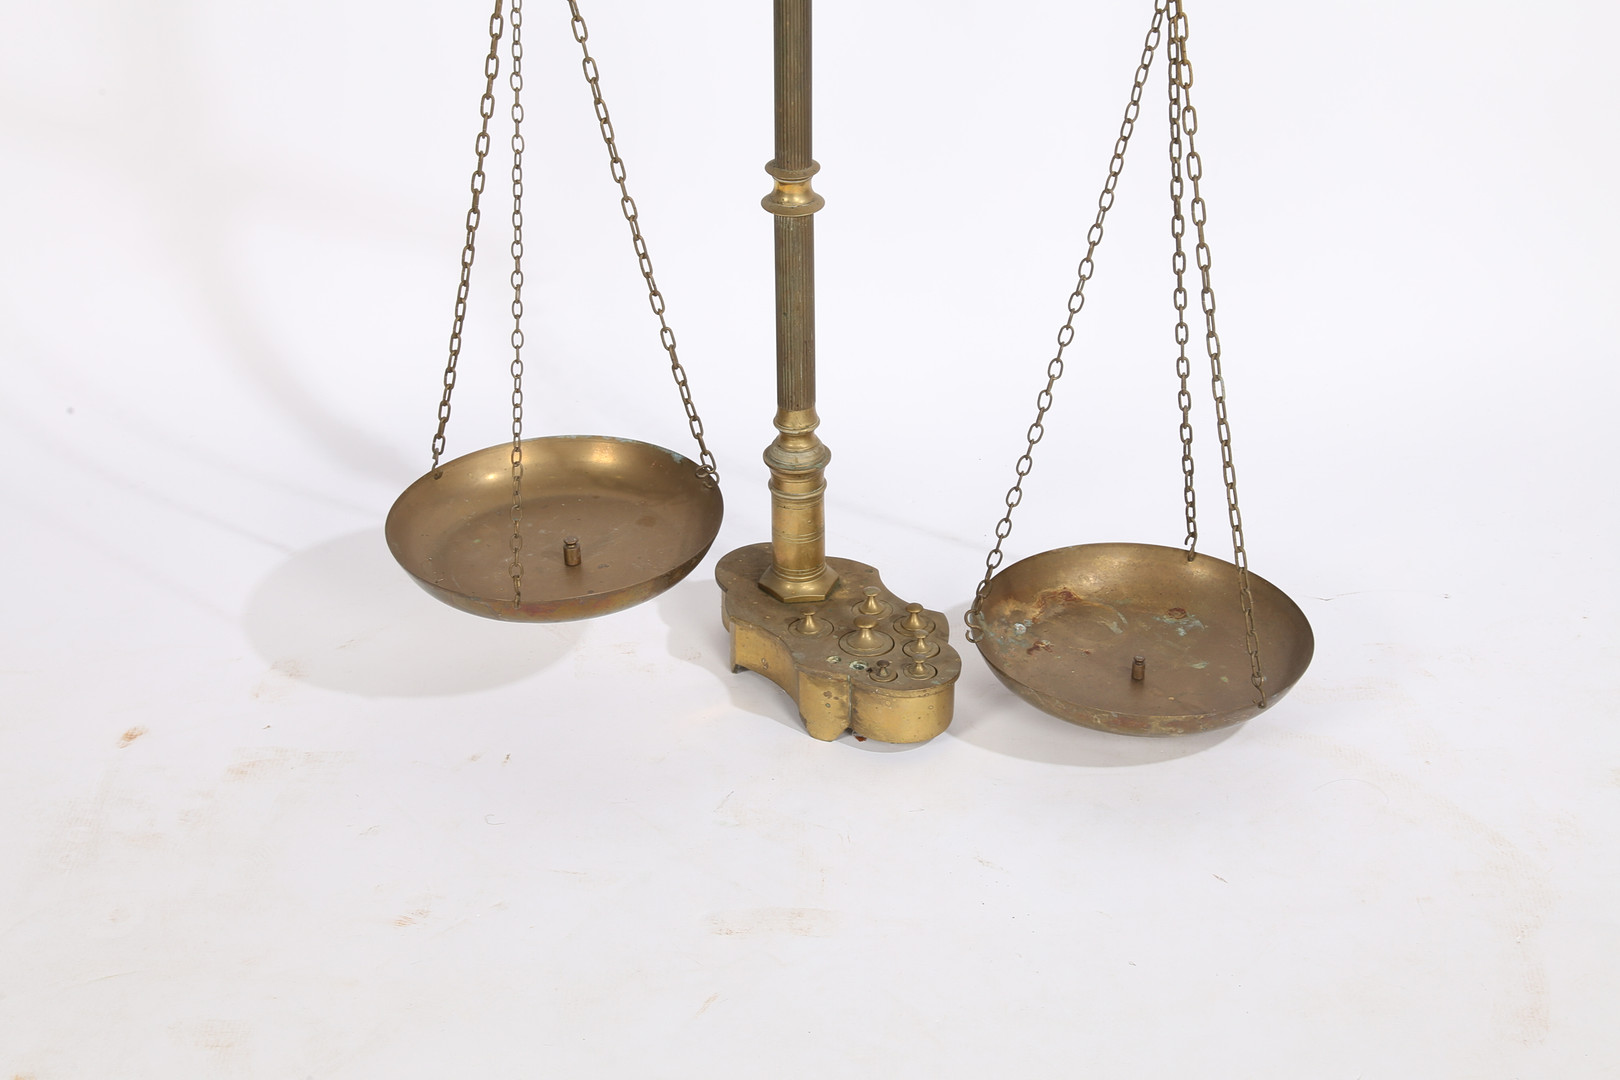 A LARGE PAIR OF 19TH/20TH CENTURY BRASS SCALES. - Image 3 of 12